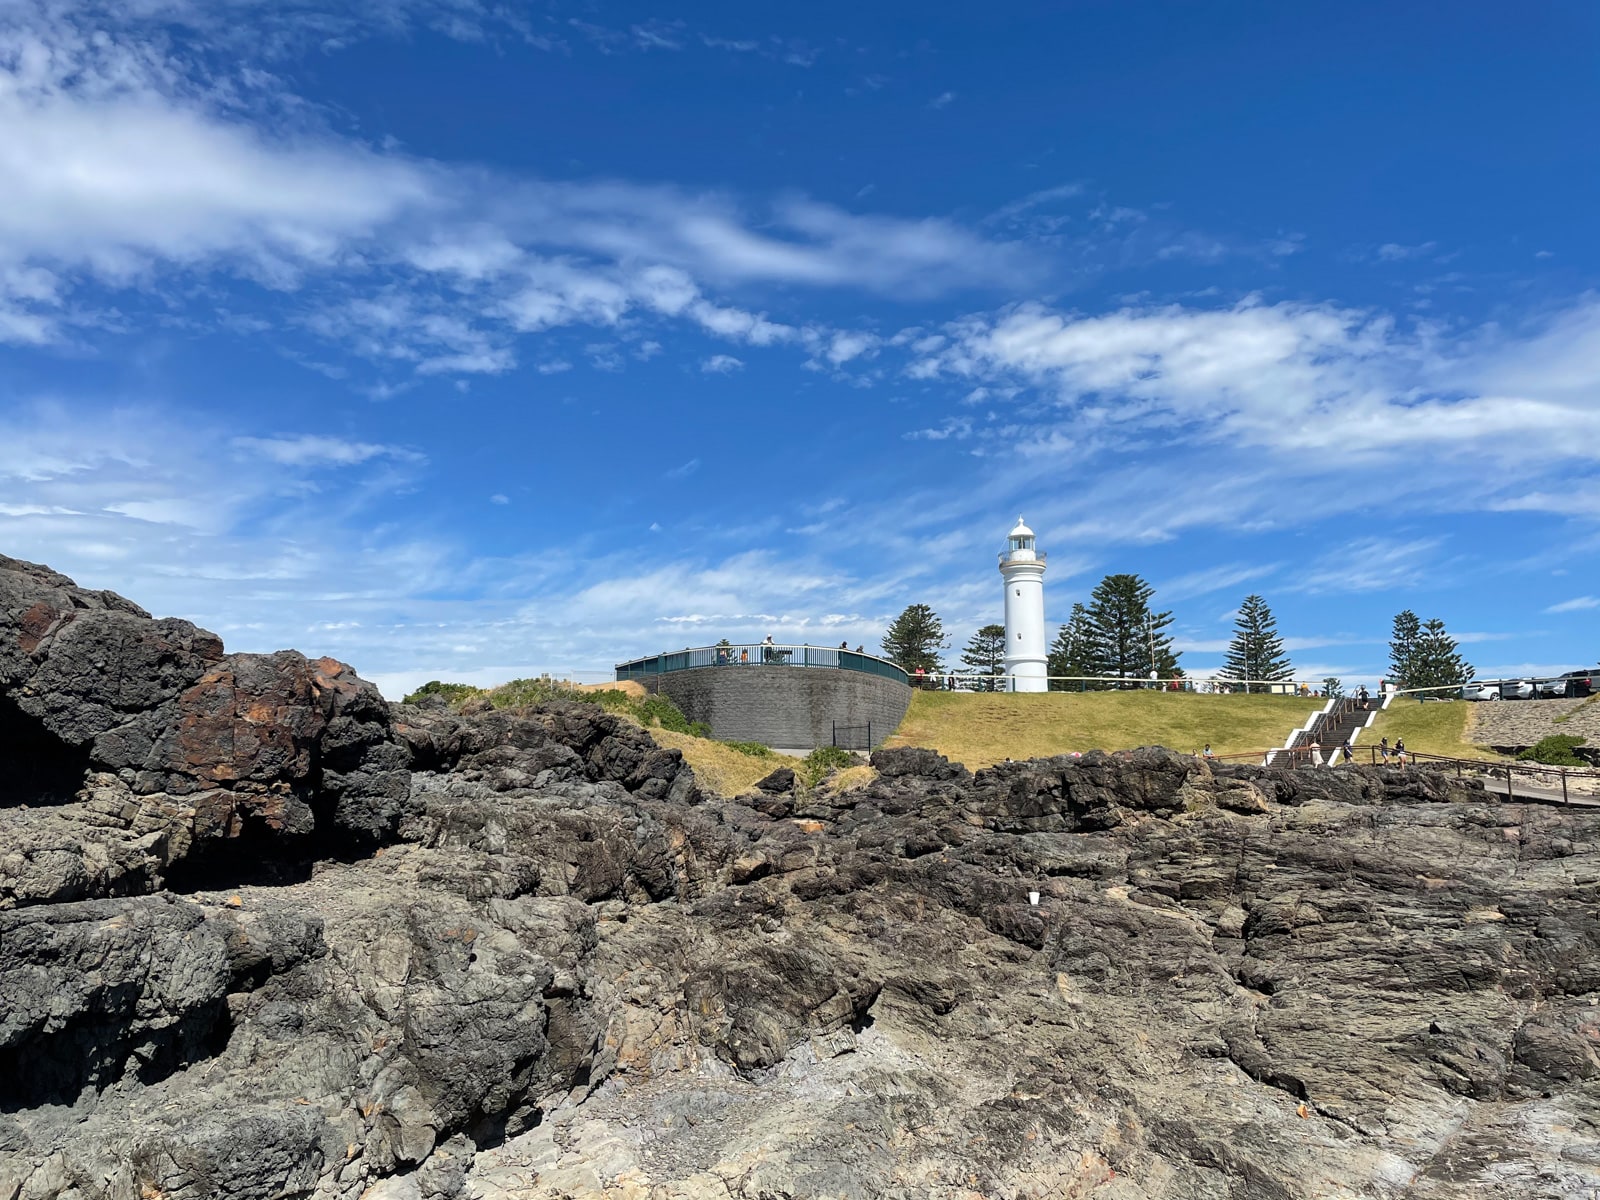 A lighthouse with stairs leading up to it and a viewing platform. In the foreground are big rocks forming an uneven surface. The sky is blue with several clouds